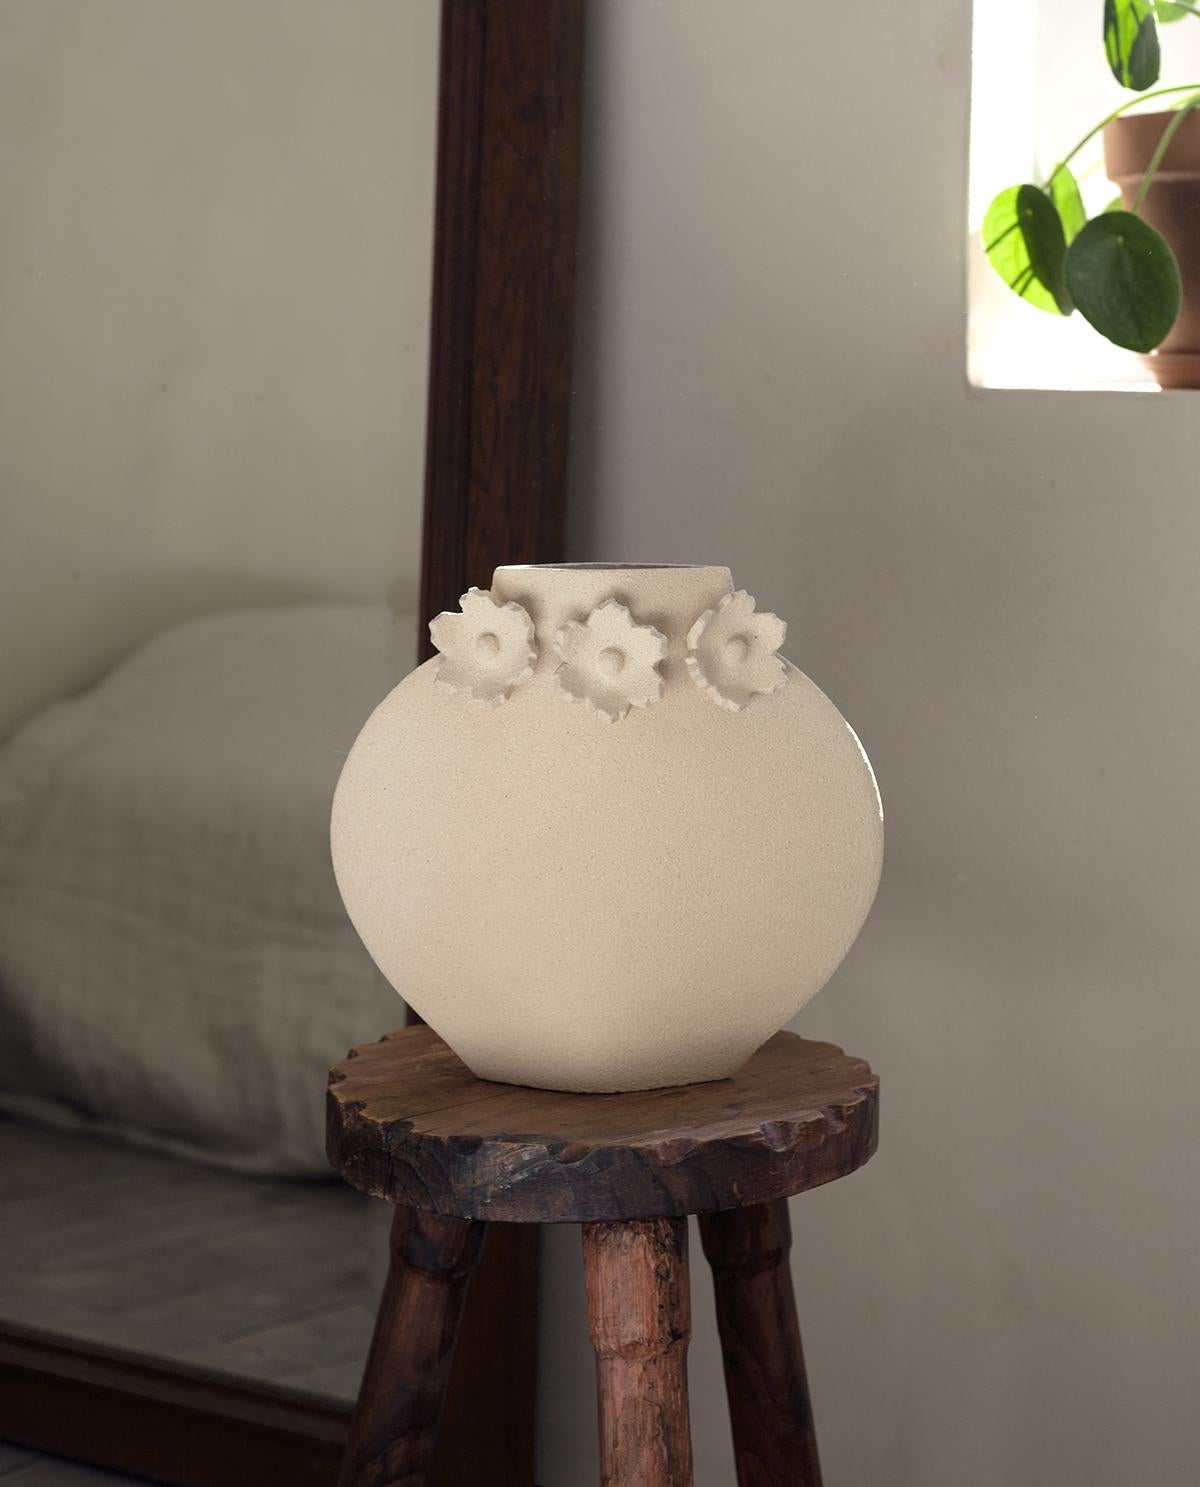 Clay 21st Century 'Sculptural Flowers' Vase in White Ceramic, Hand-Crafted in France For Sale